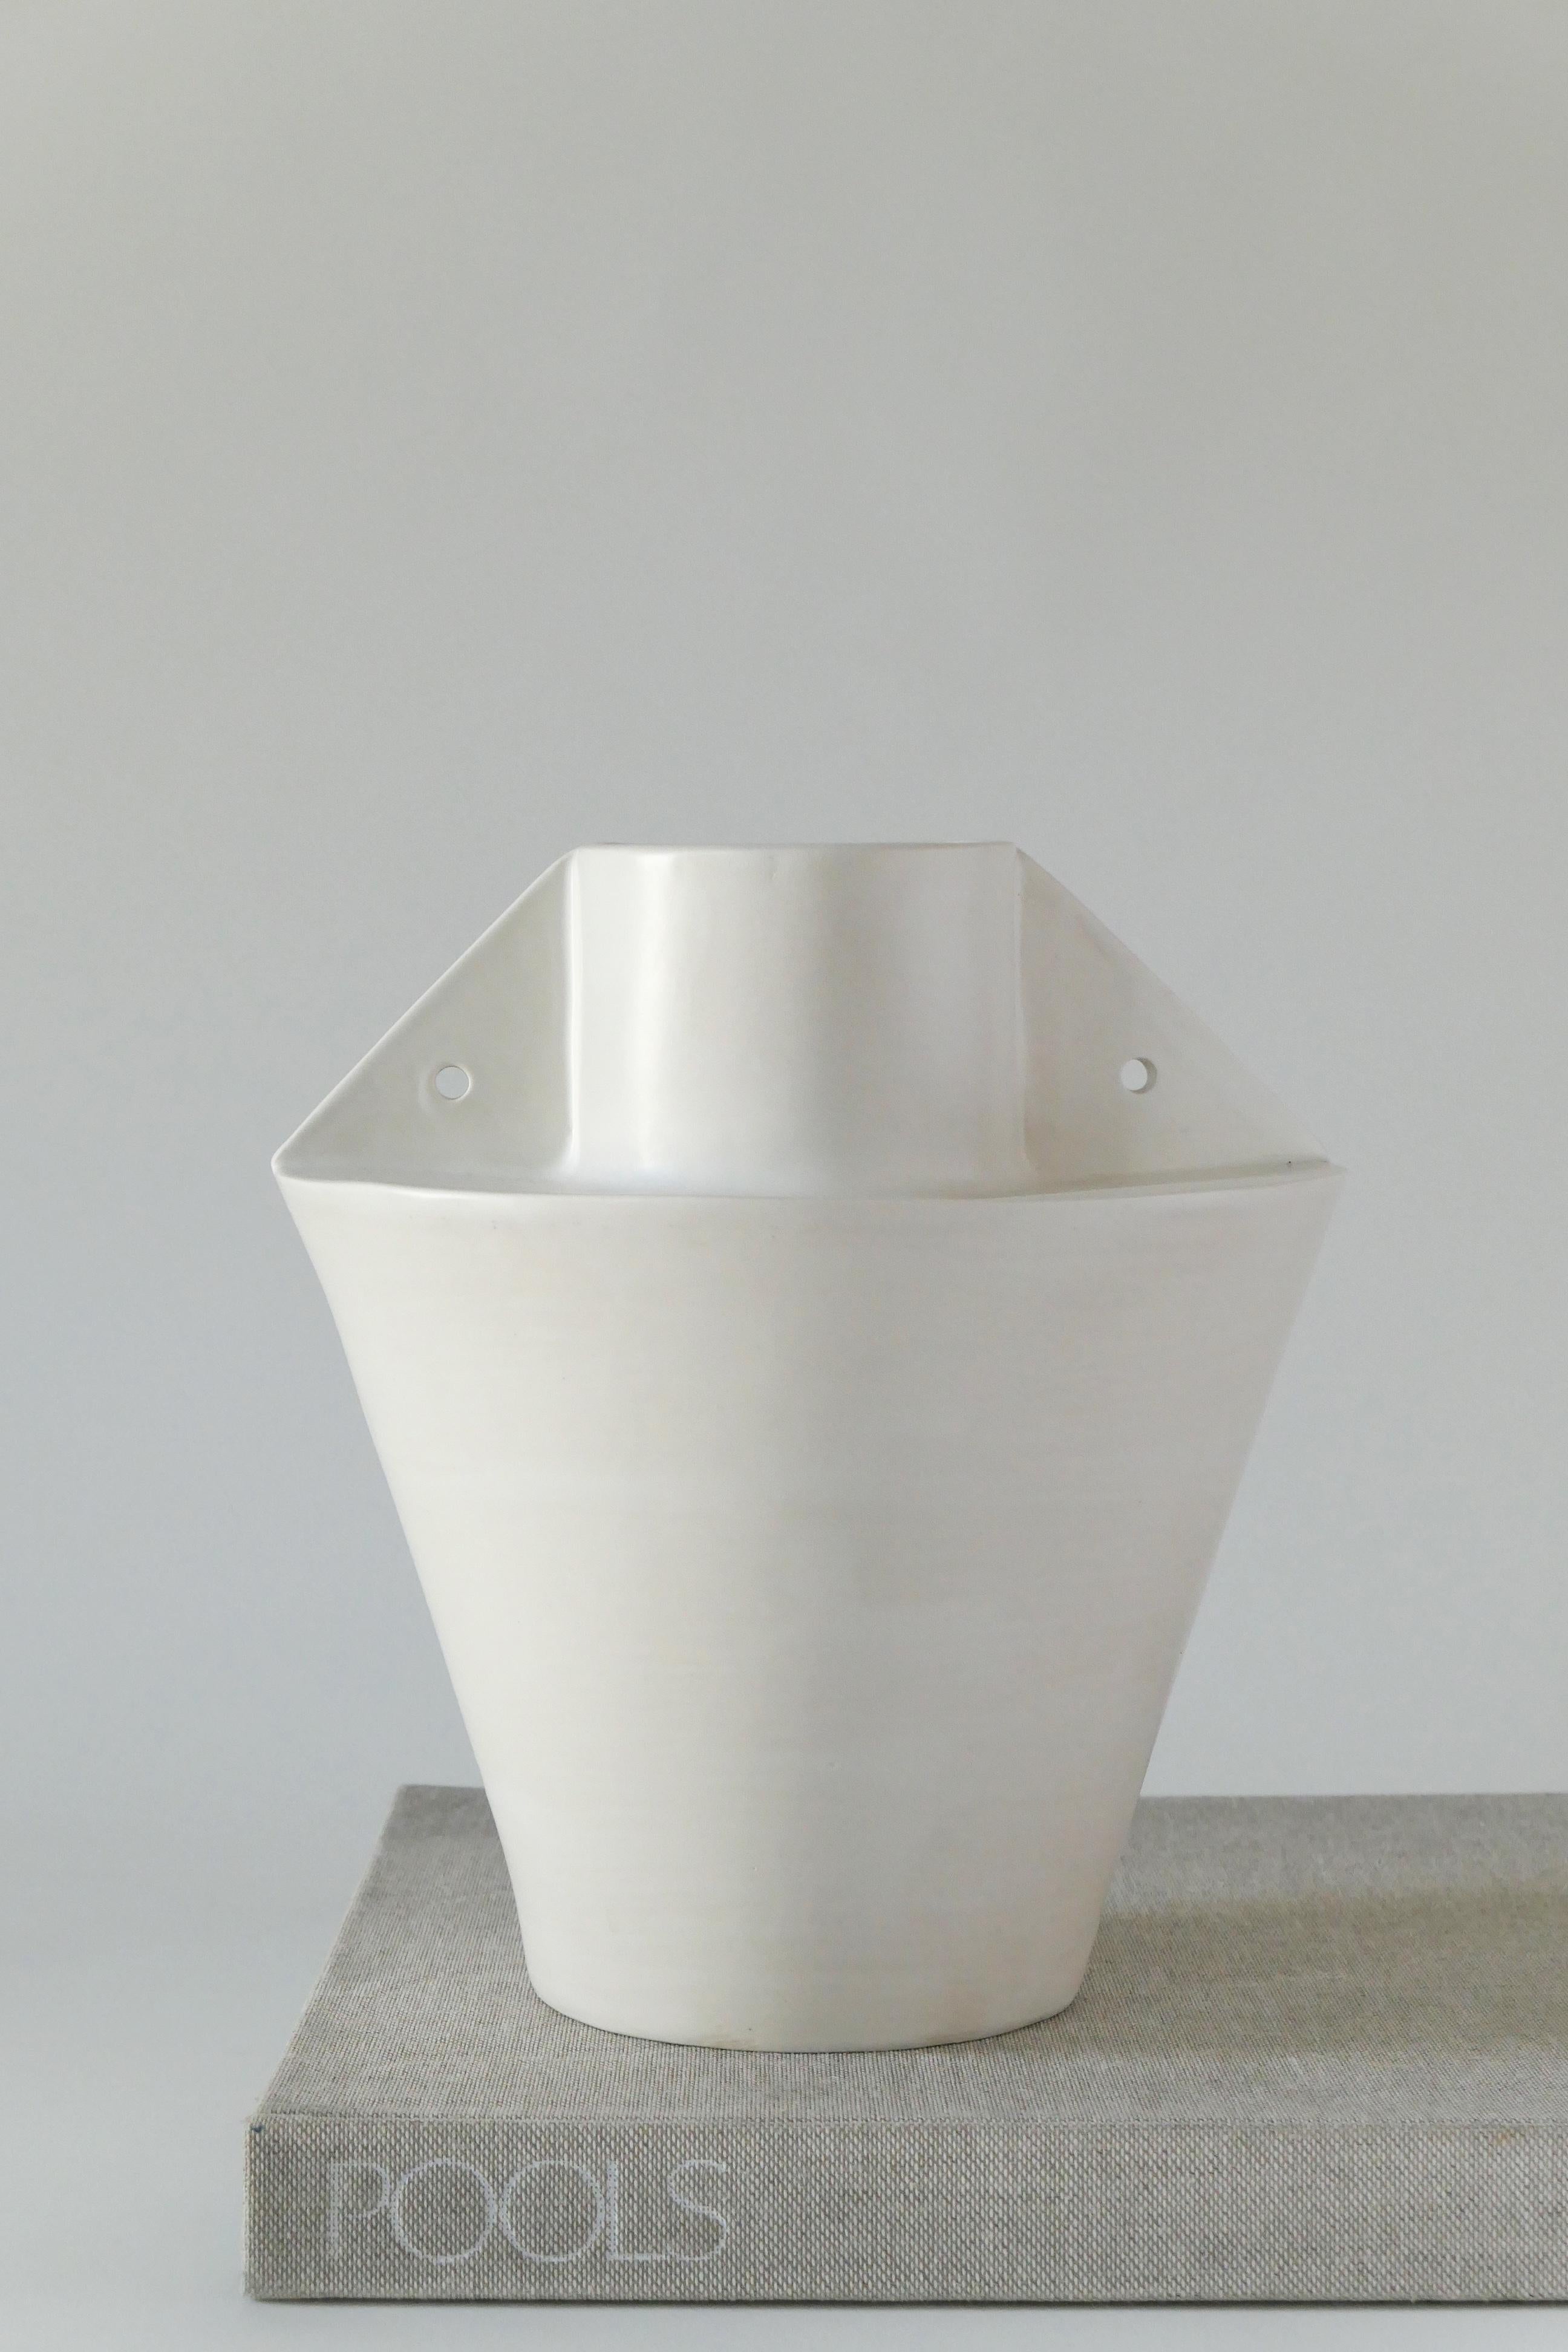 White stoneware vase, finished with a soft, white glaze. This vase is built buy hand using clay slabs.

Karina Vieira is a Brooklyn-based ceramicist focusing on handbuilt vessels. 

Her work references various styles, touching on the